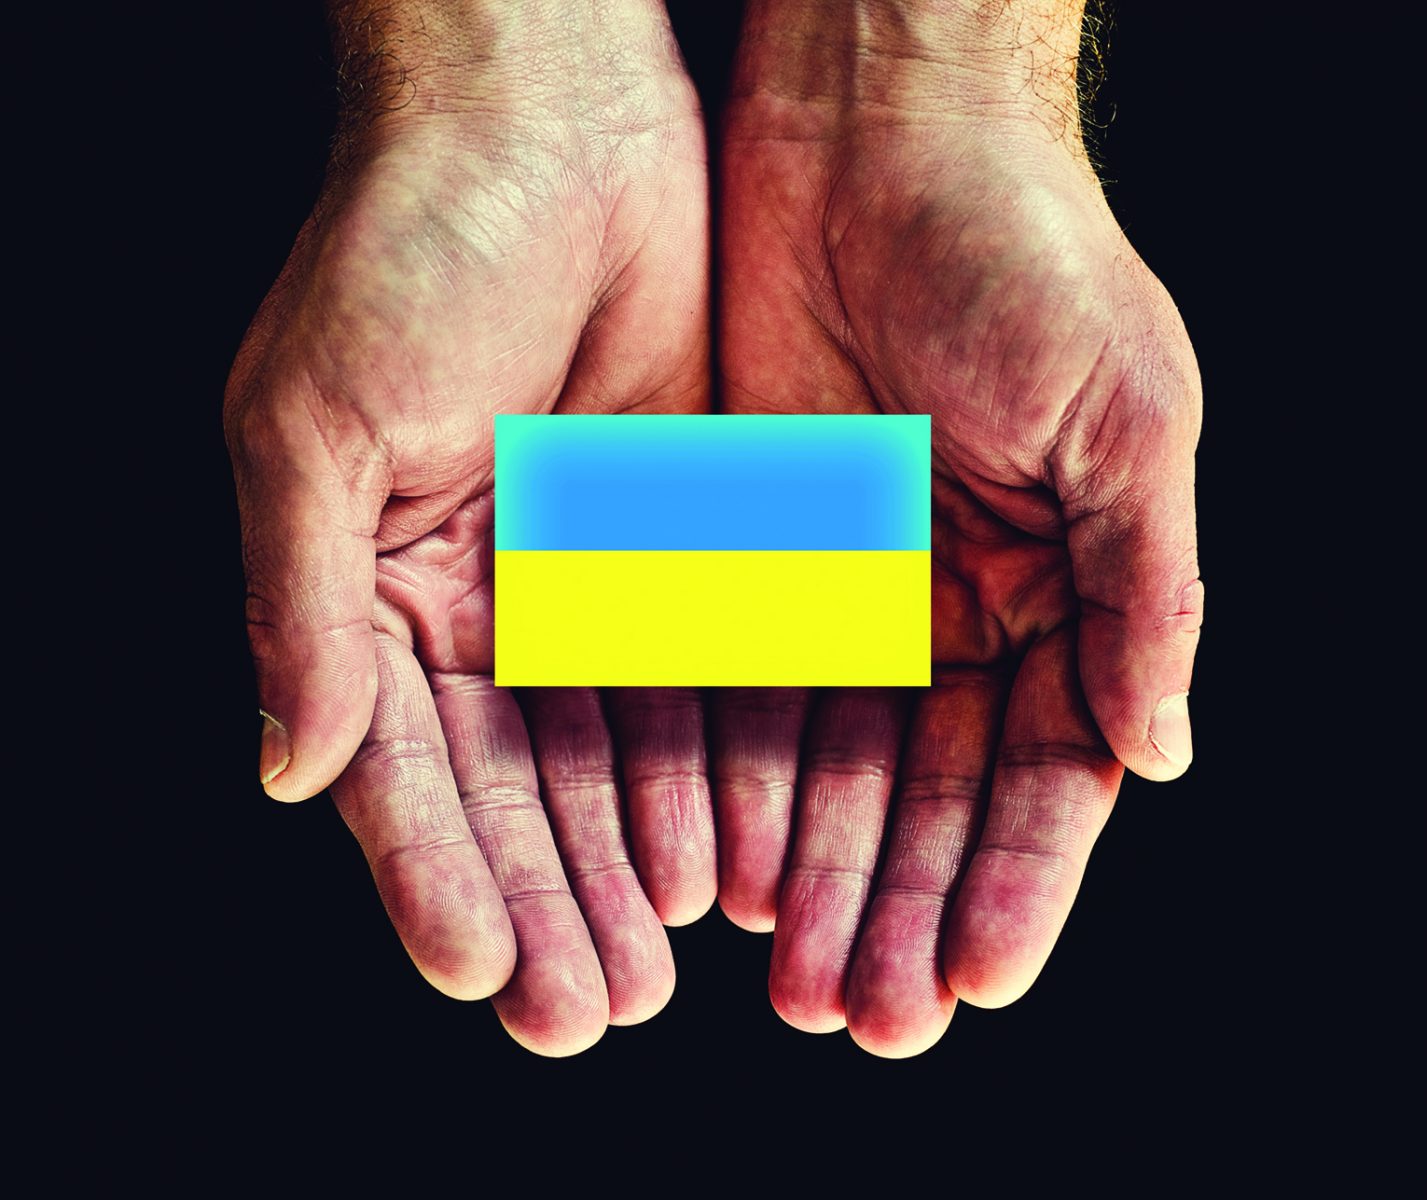 Help “Alleviate the Pain in Ukraine” by giving to CARE International